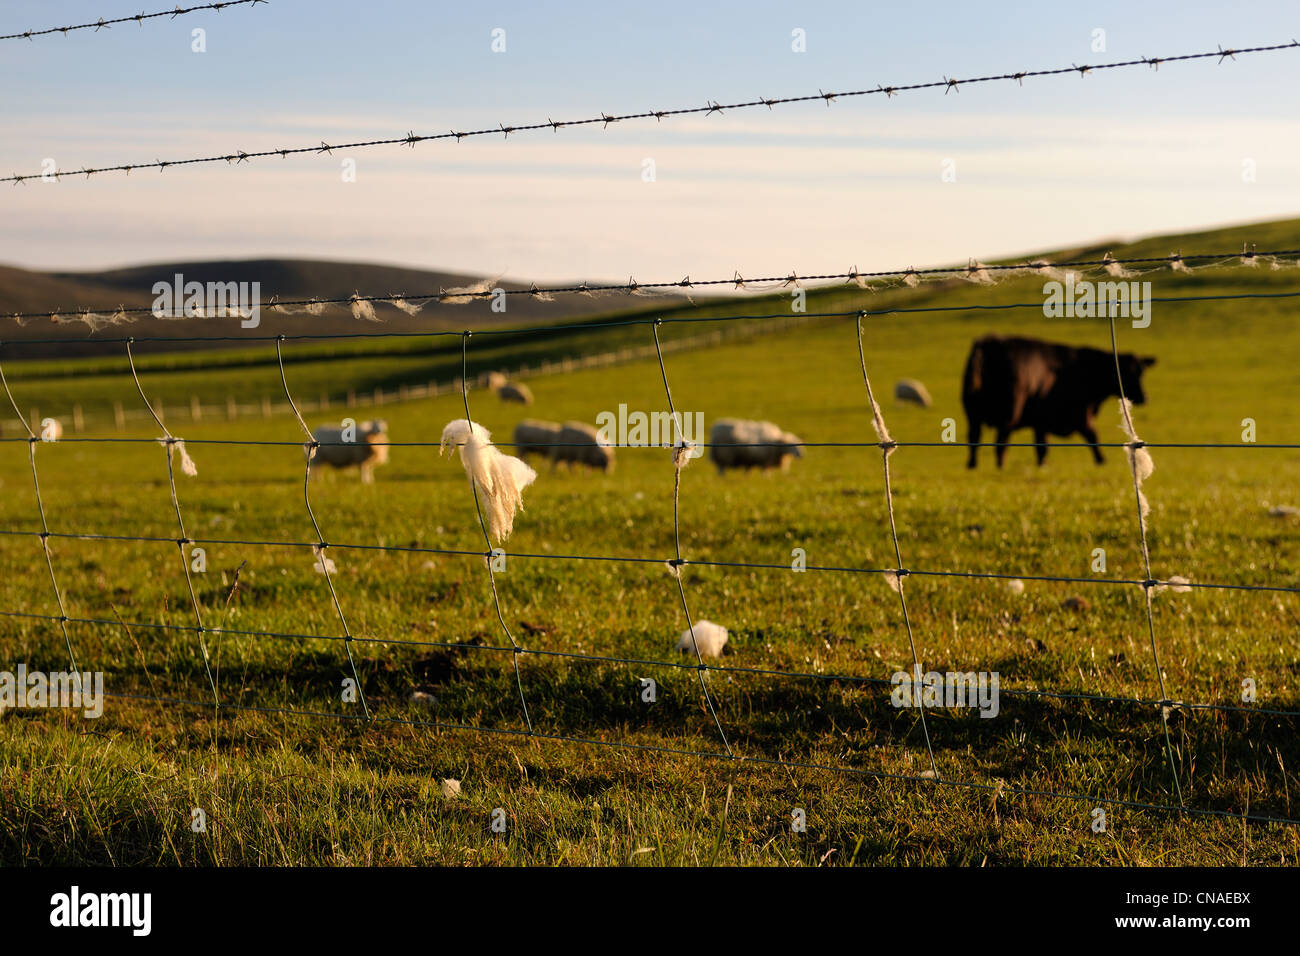 United Kingdom, Scotland, Orkney Islands, Isle of Mainland, sheep's wool caught in the fence Stock Photo